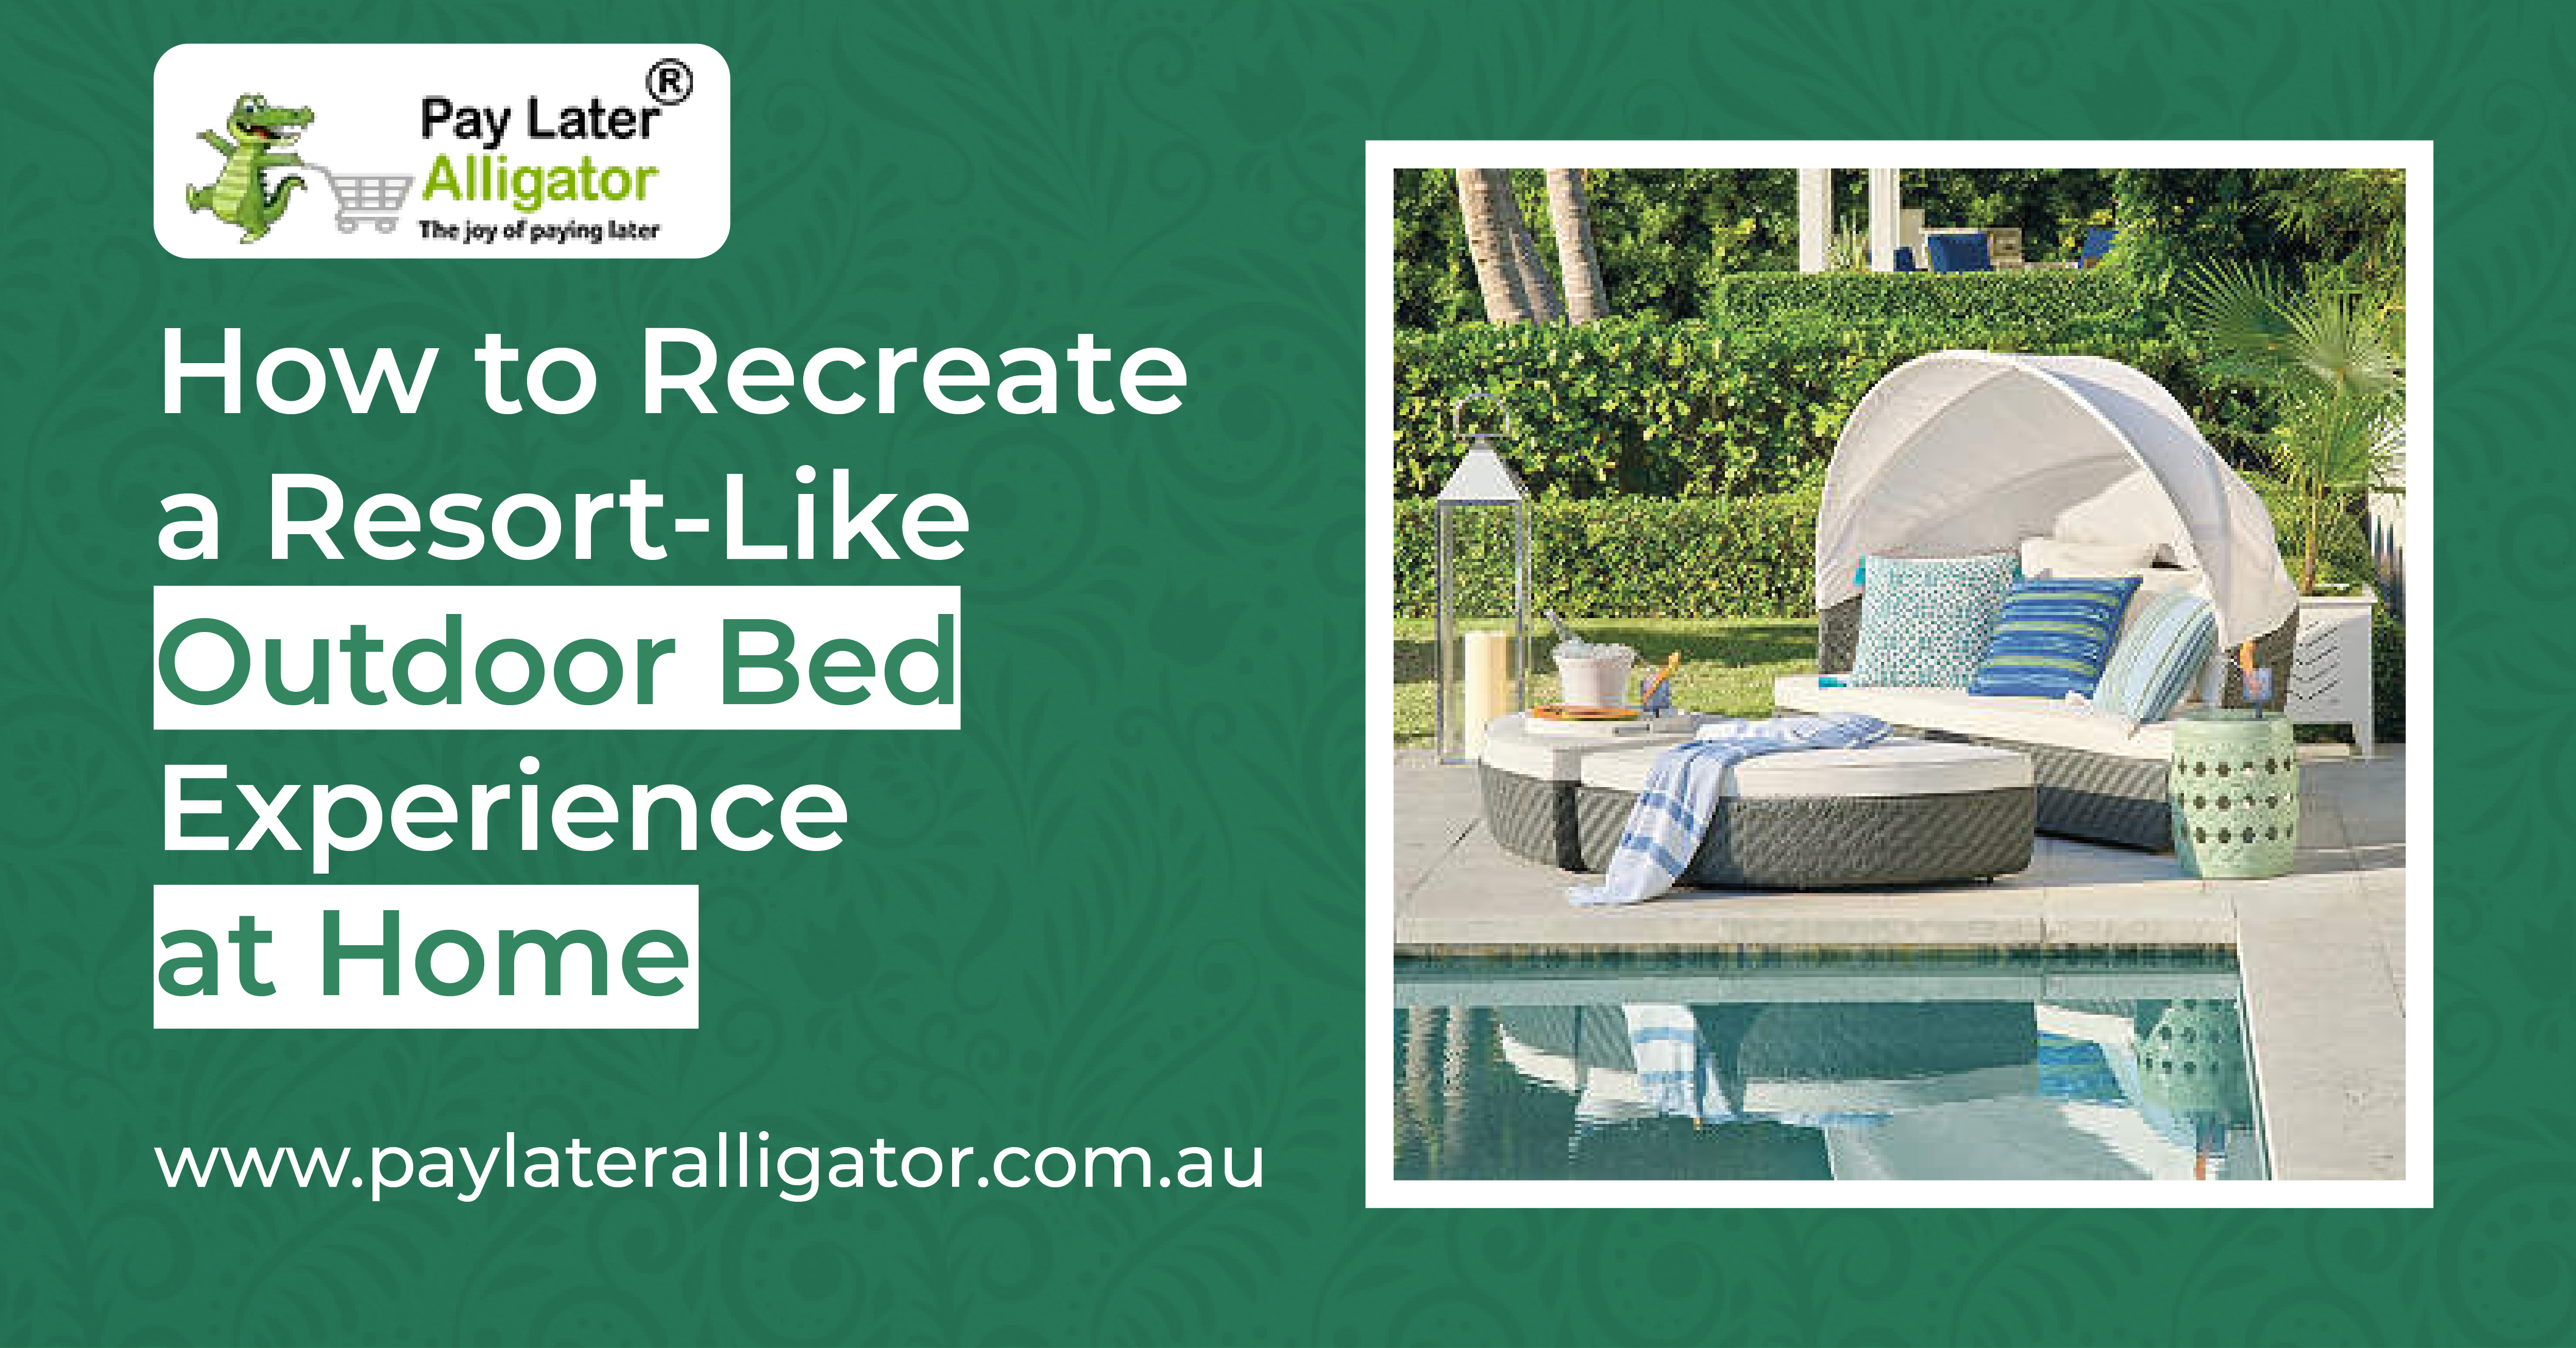 How to Recreate a Resort-Like Outdoor Bed Experience at Home